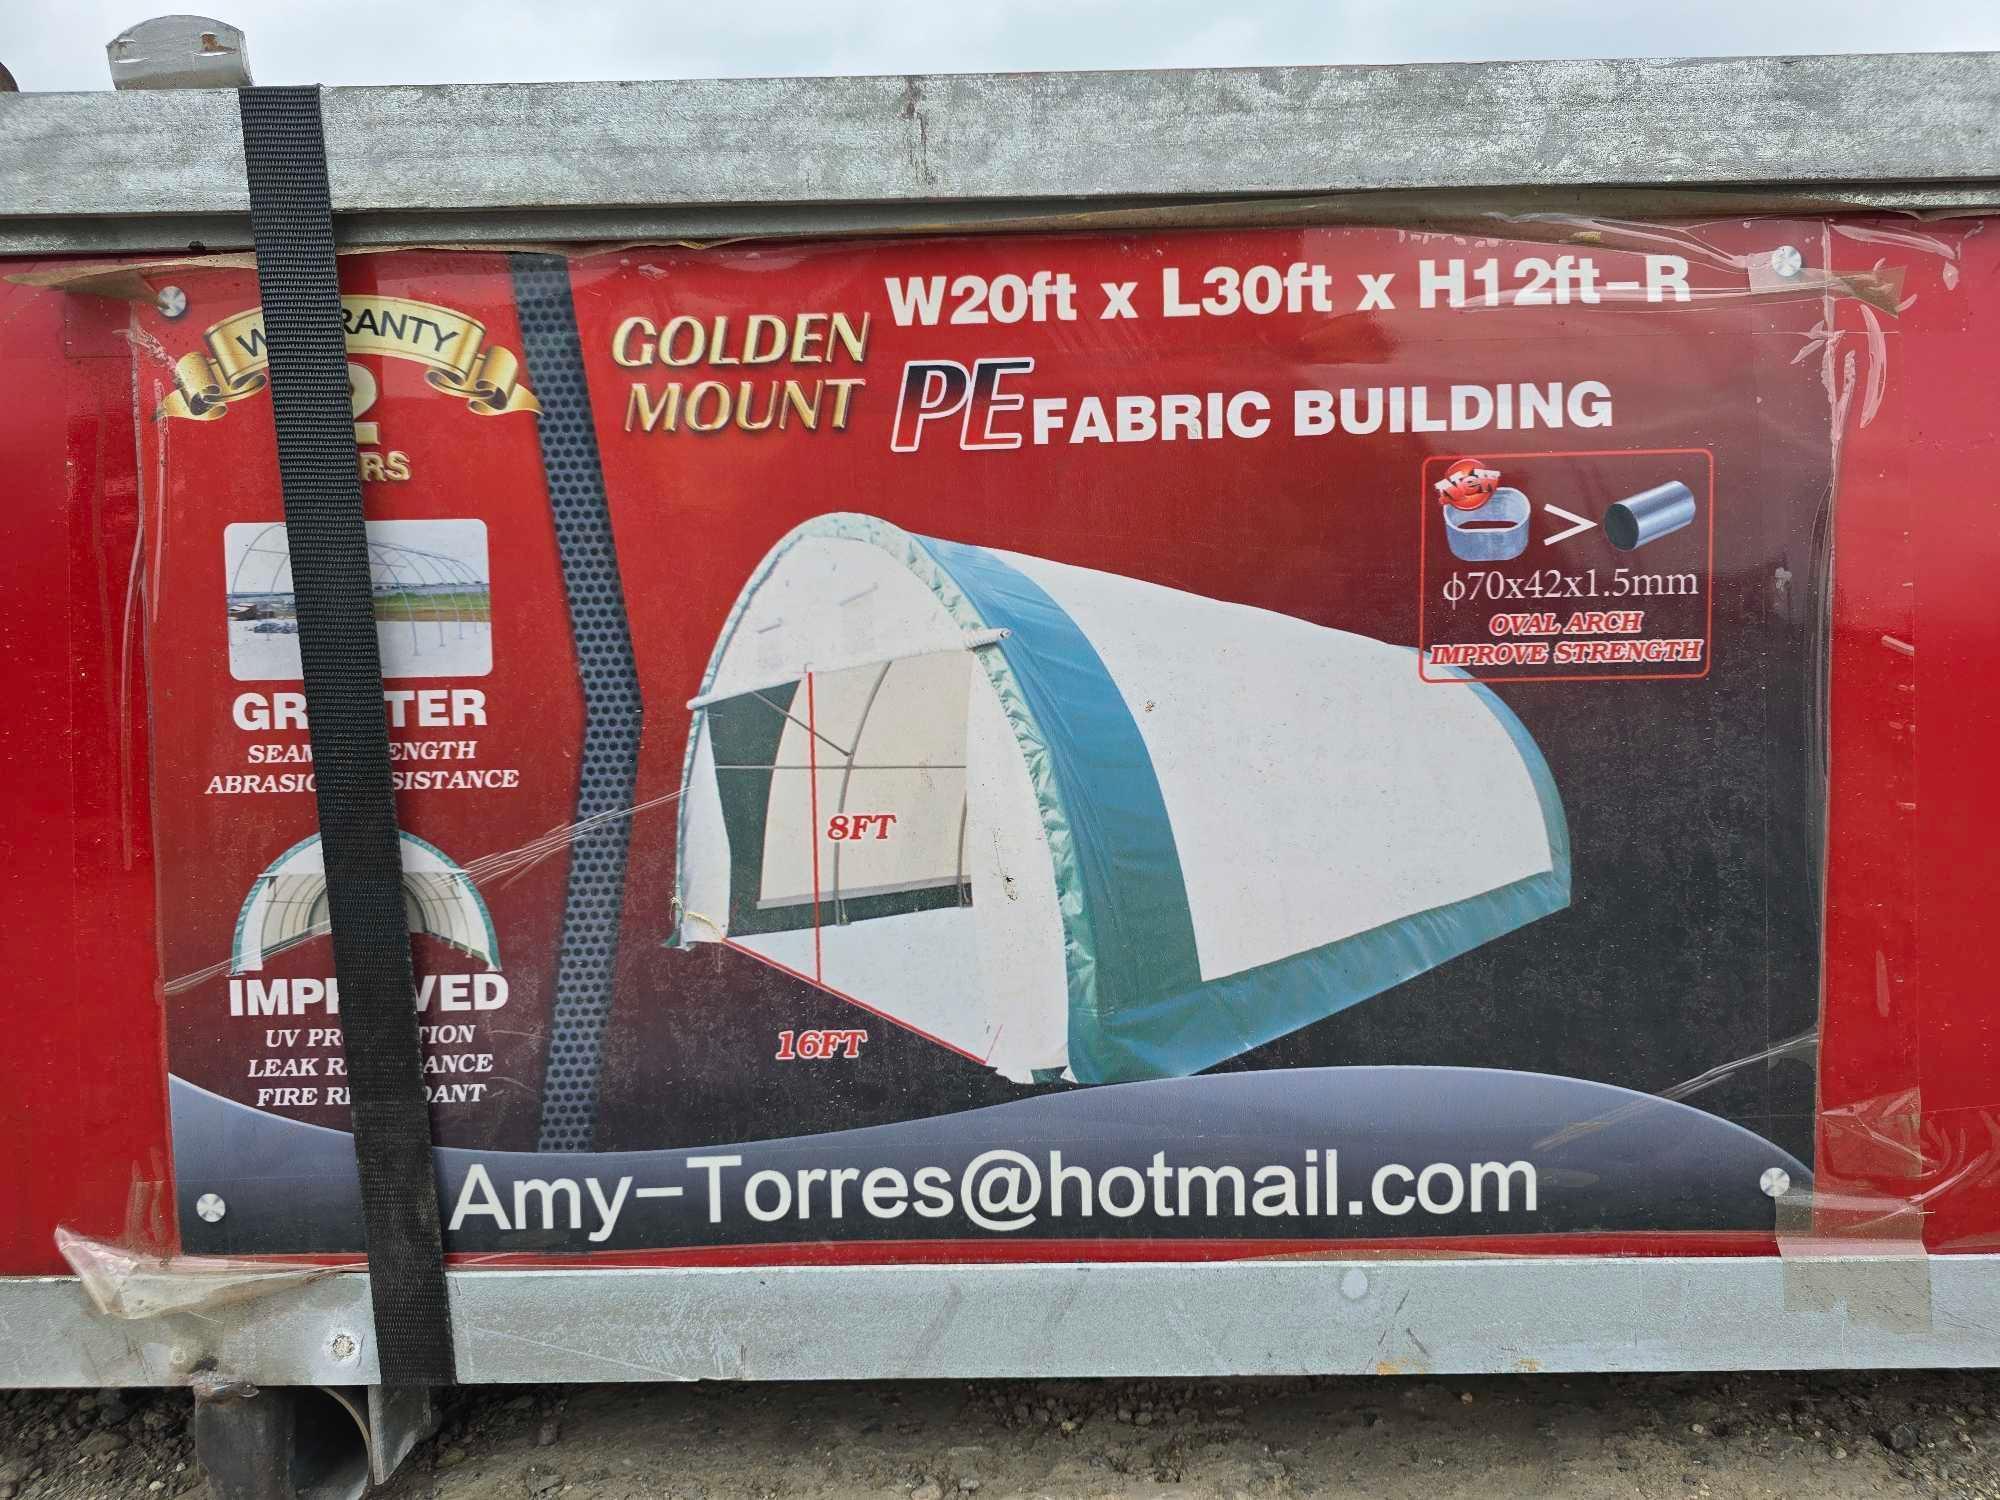 Golden Mount S-203012R - 20FT x 30FT Single Trussed Storage Tent